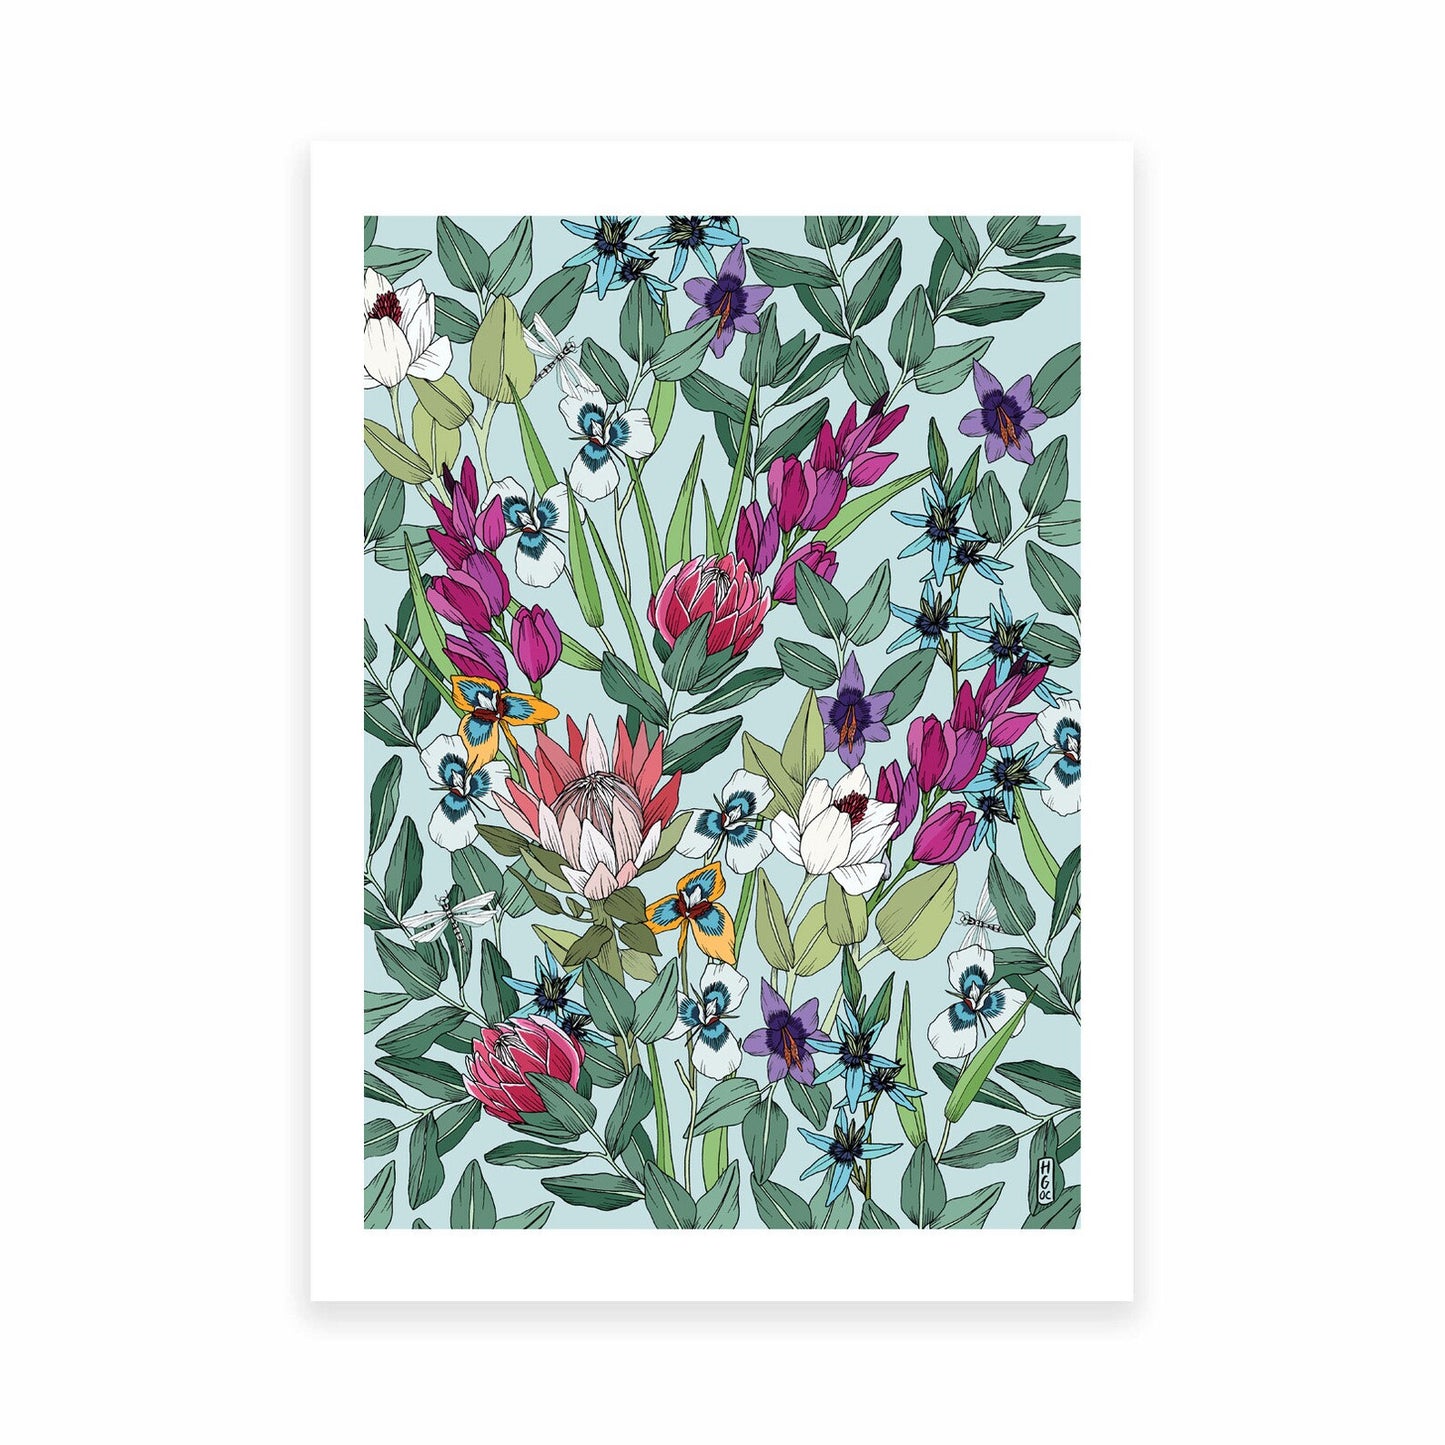 Hannah Grace A4 colouful art print plants and flowers from South Africa